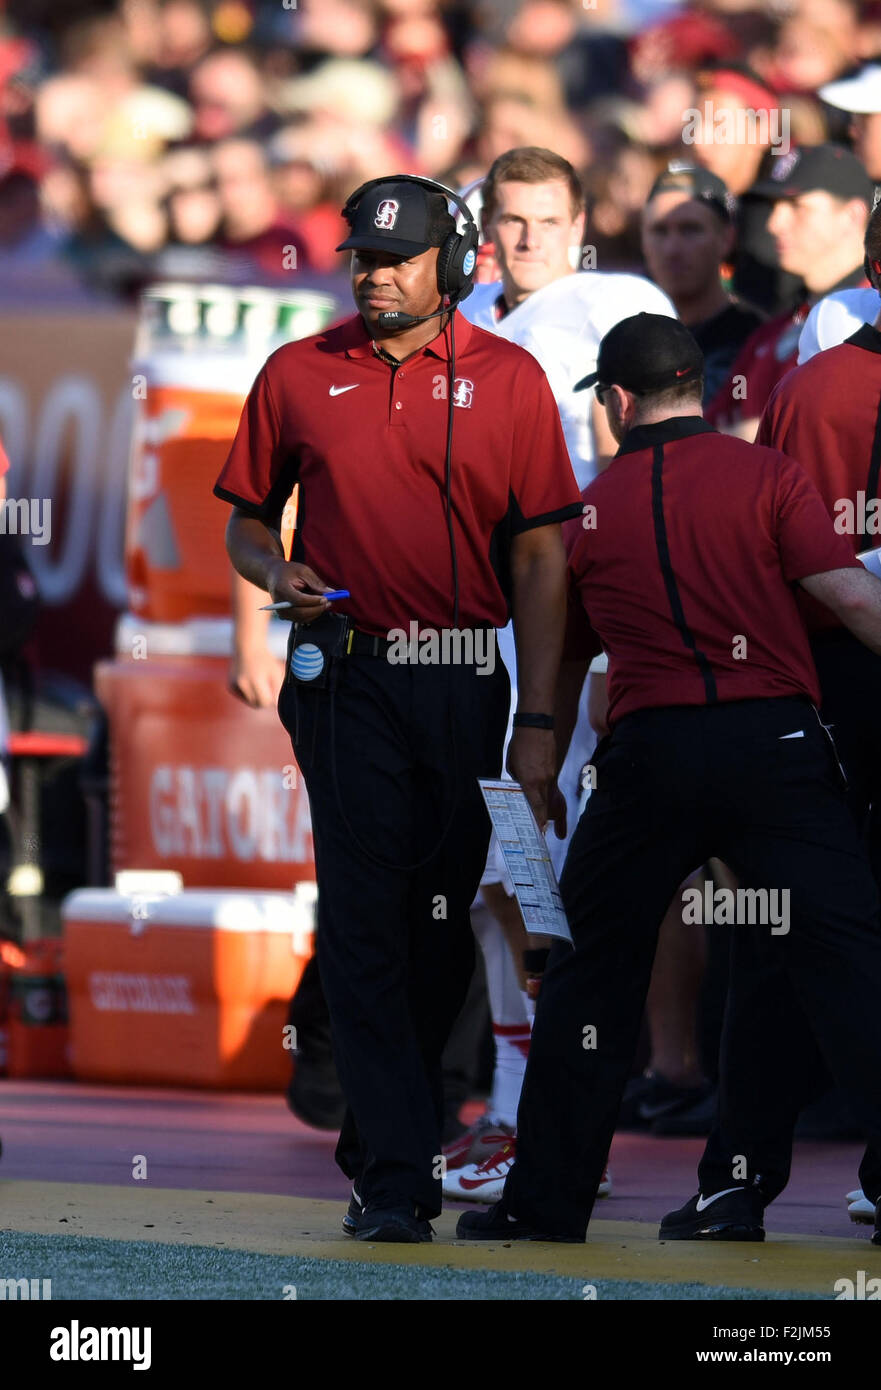 Los Angeles, CA, USA. 19th Sep, 2015. David Shaw Head Coach of Stanford during the NCAA Football game between the Stanford Cardinal and the USC Trojans at the Coliseum in Los Angeles, California John Green/CSM/Alamy Live News Stock Photo